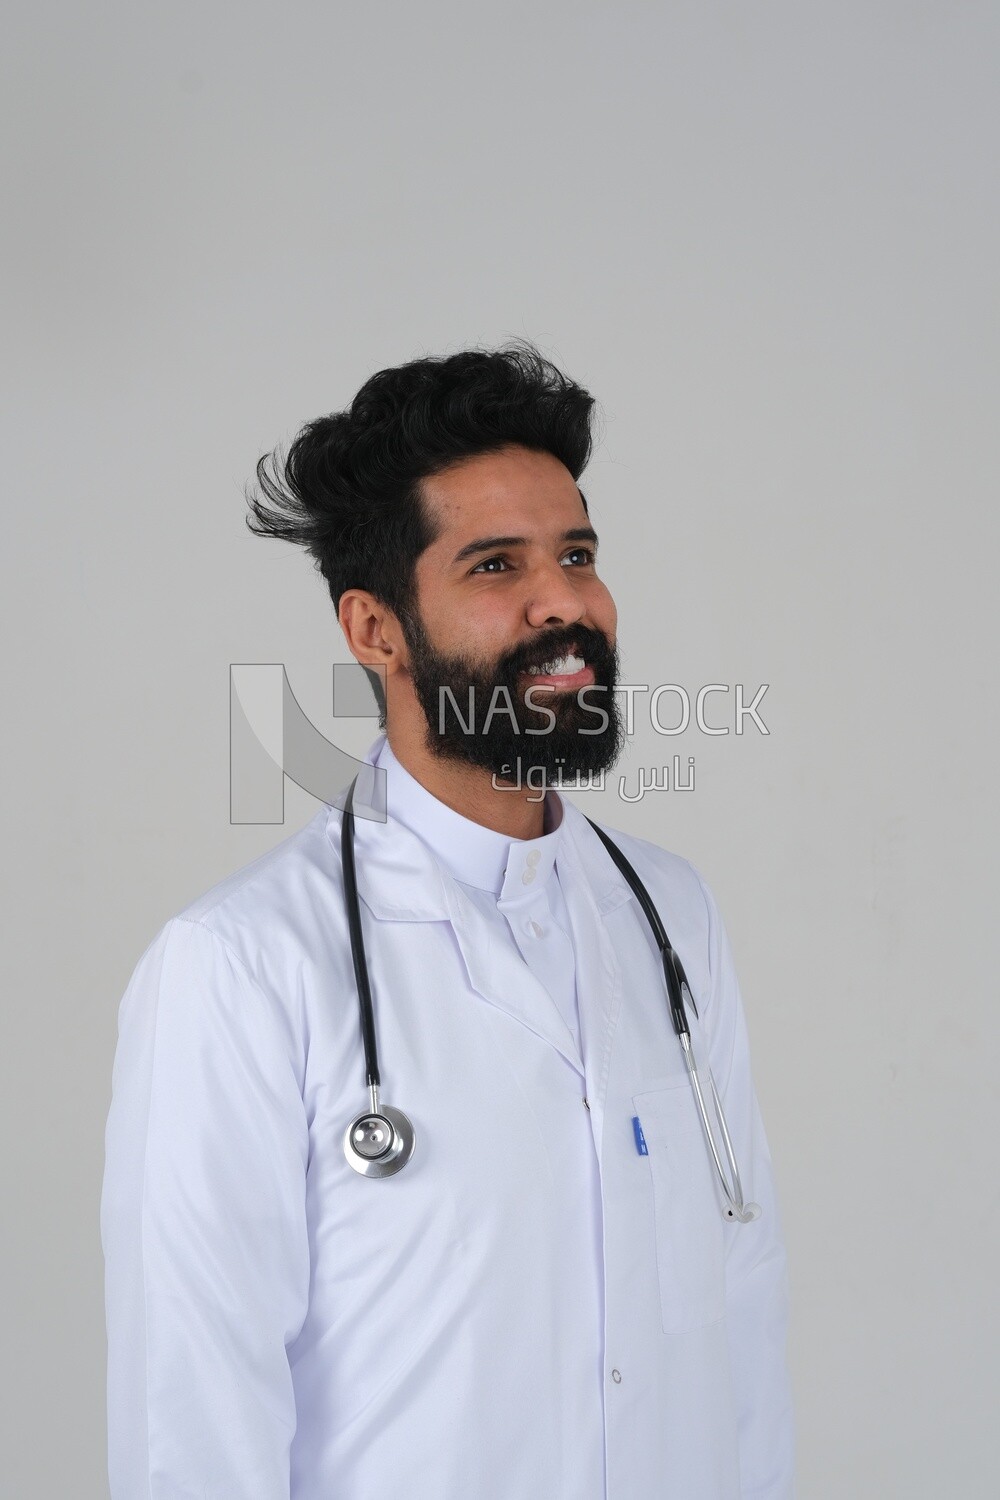 Saudi man wearing a medical coat and a stethoscope, white background, medicine and health care, Saudi model